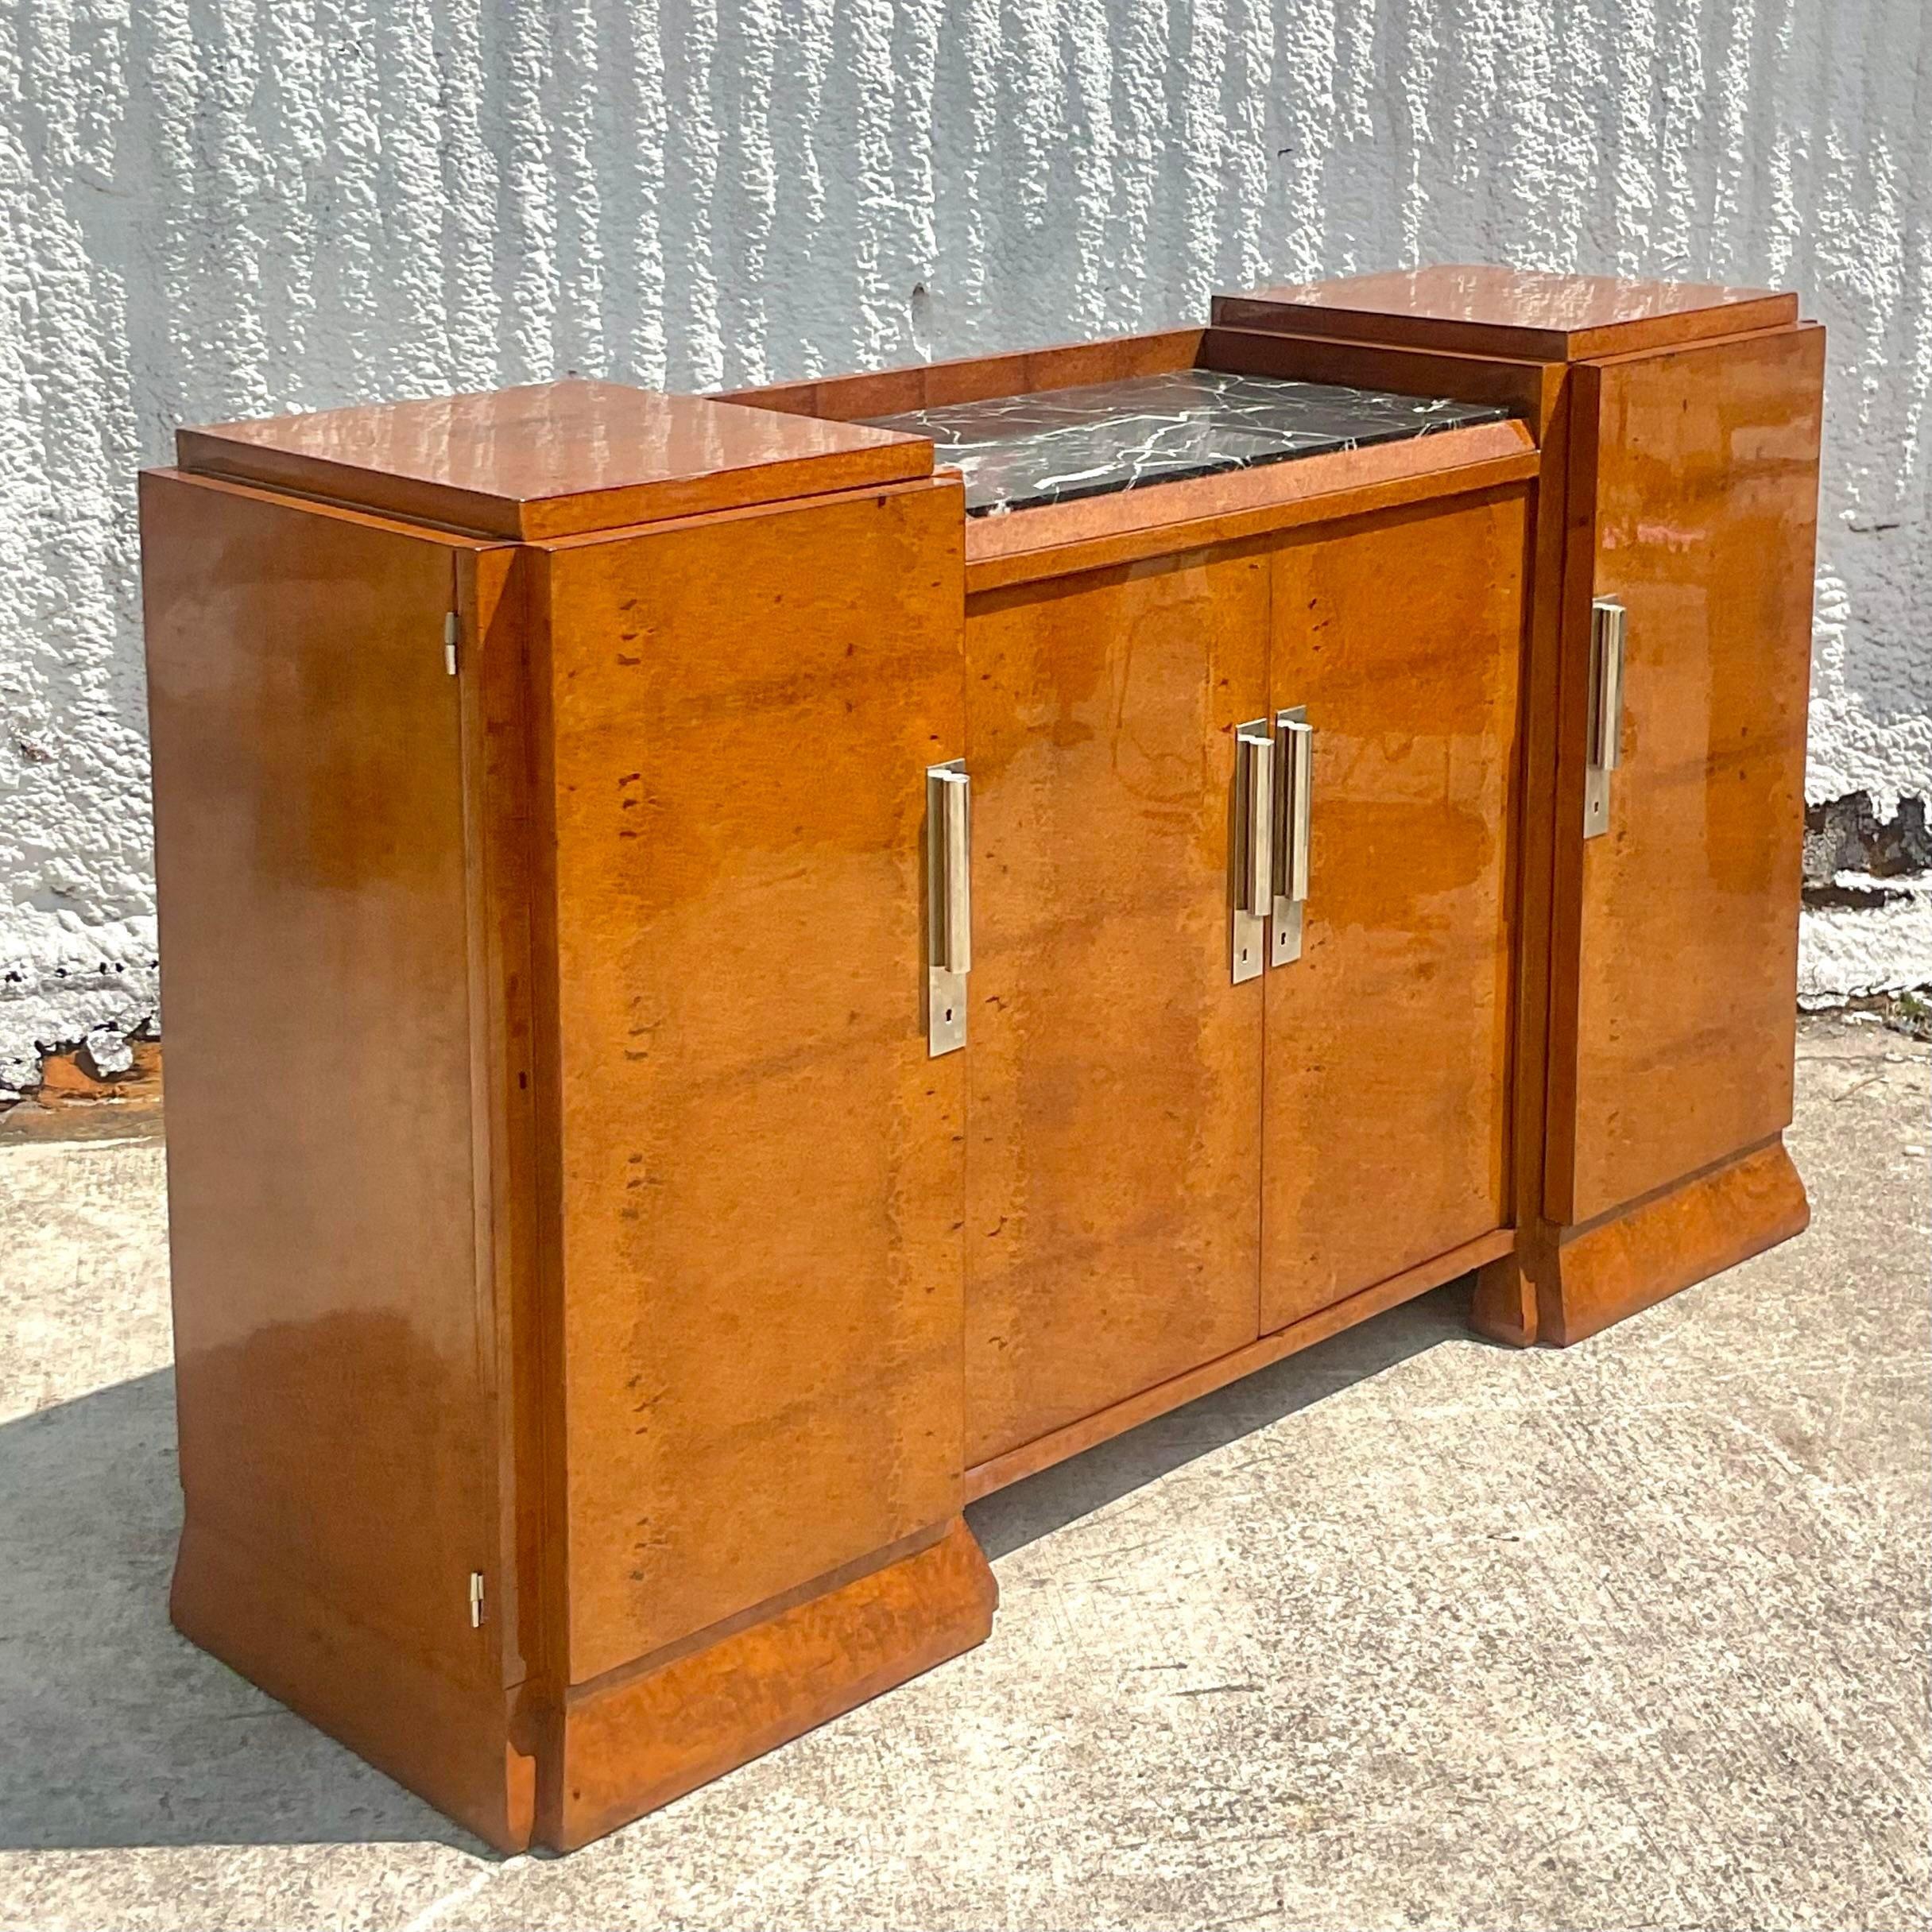 An exceptional vintage French Art Deco sideboard. Beautiful burl wood cabinet with black marble panel on top. Chic cylindrical hardware. A spectacular piece. Acquired from a Palm Beach estate.